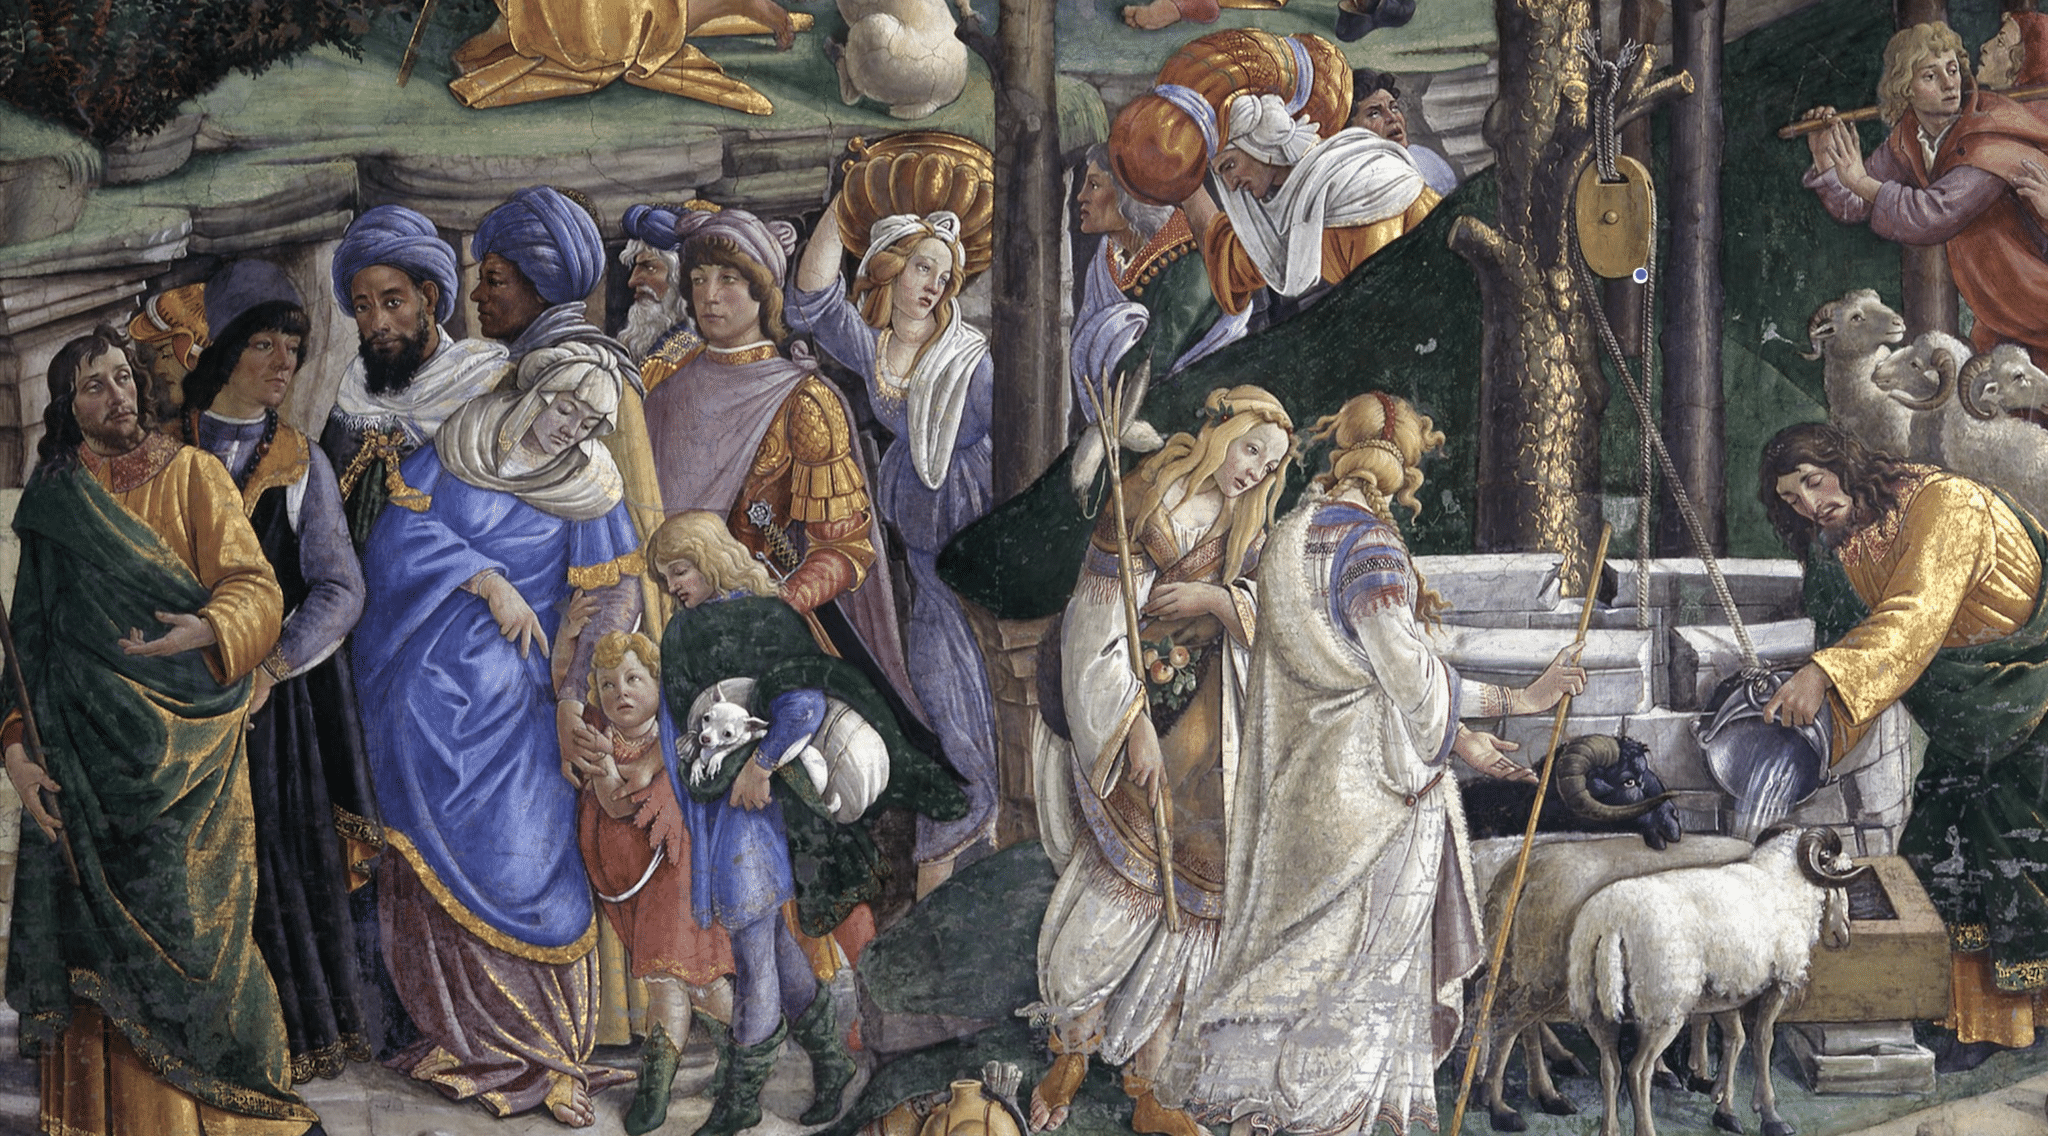 This is a detail from Sandro Botticelli's "The Trials of Moses," painted on the south wall of the Sistine Chapel at the Vatican. Antonio Paolucci, director of the Vatican Museums, said it is his favorite Old Testament-inspired piece in the Vatican Museums. (CNS photo/courtesy of the Vatican Museums) (Sept. 19, 2008)